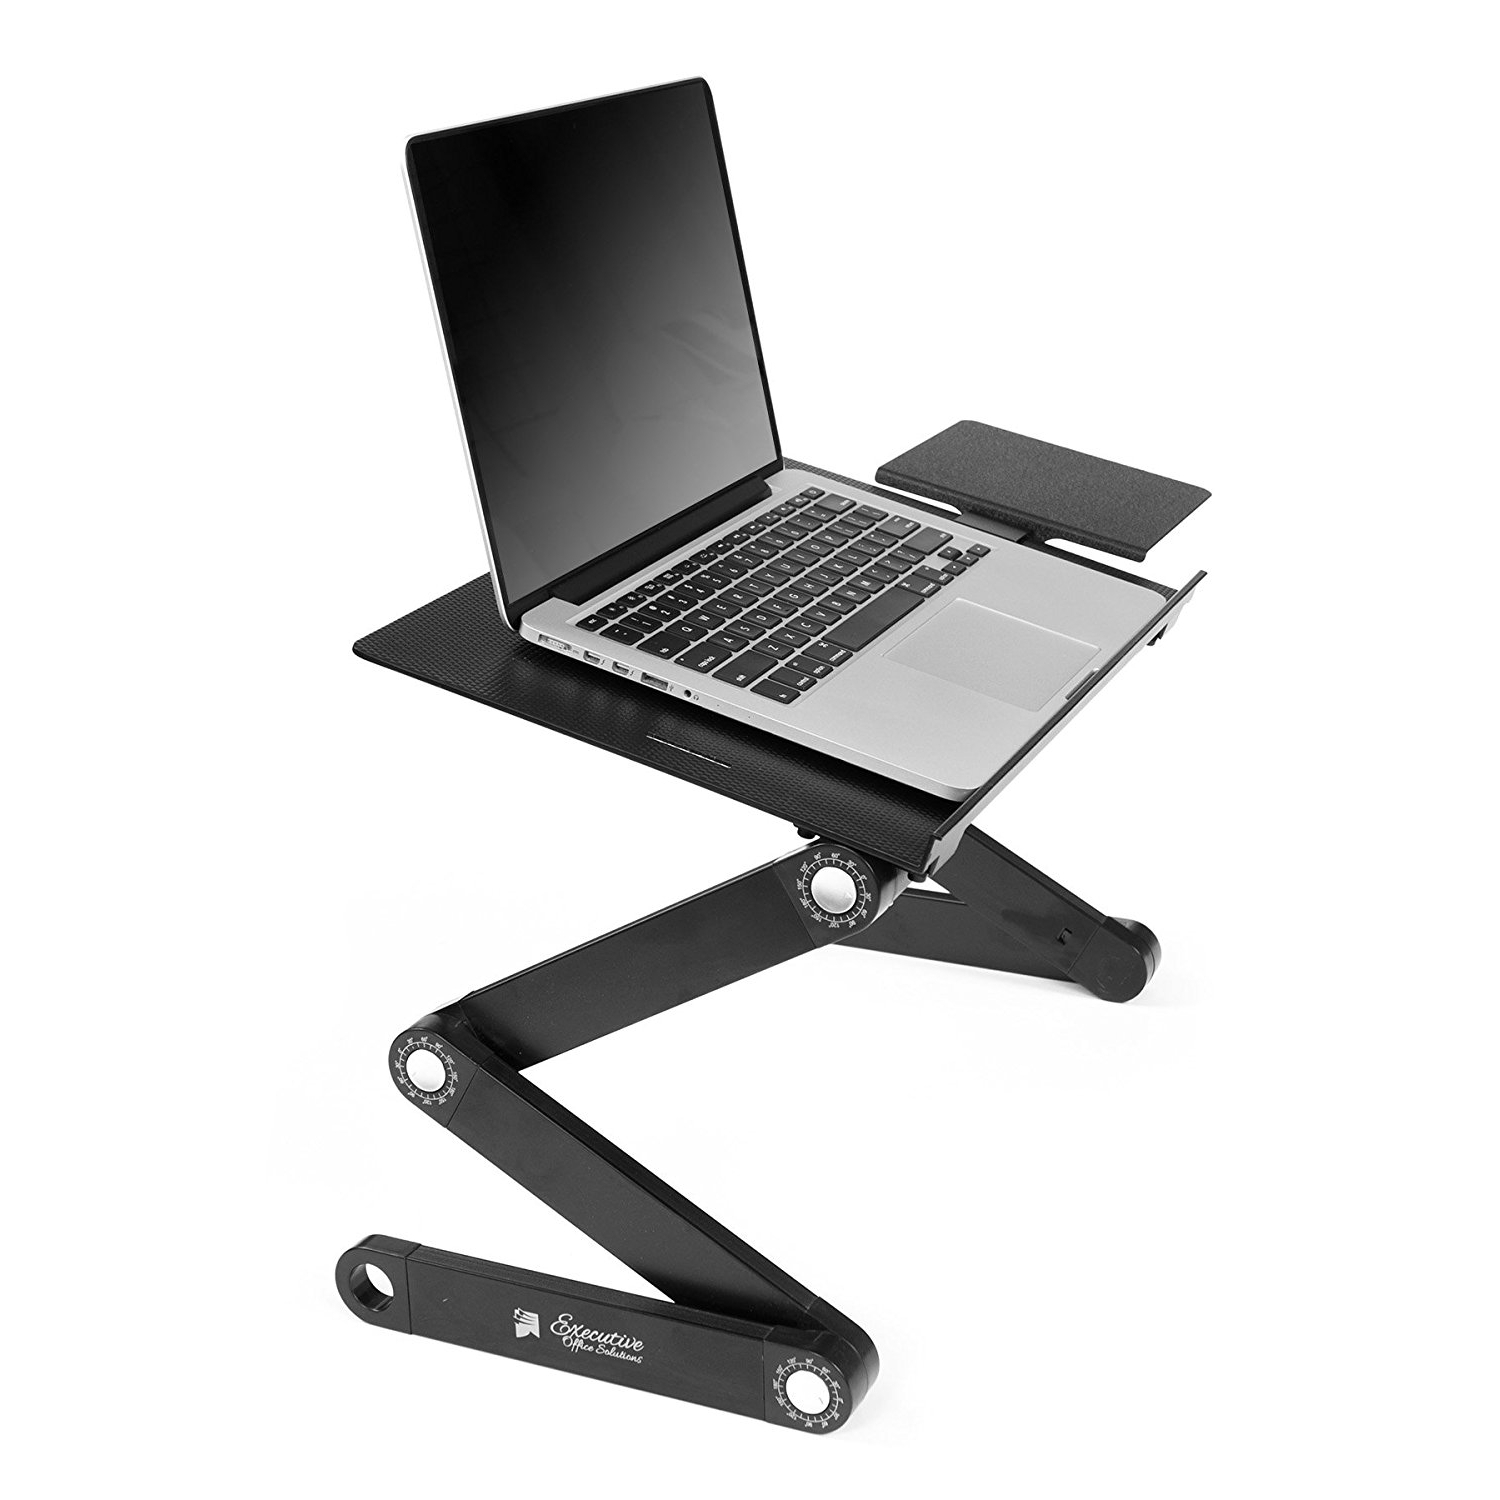 Multi-Angle Stand Portable Foldable Laptop Riser Notebook Holder Stand for 10-15.6 in Laptop Soffiya Laptop Stand Adjustable Laptop Stand for Desk 